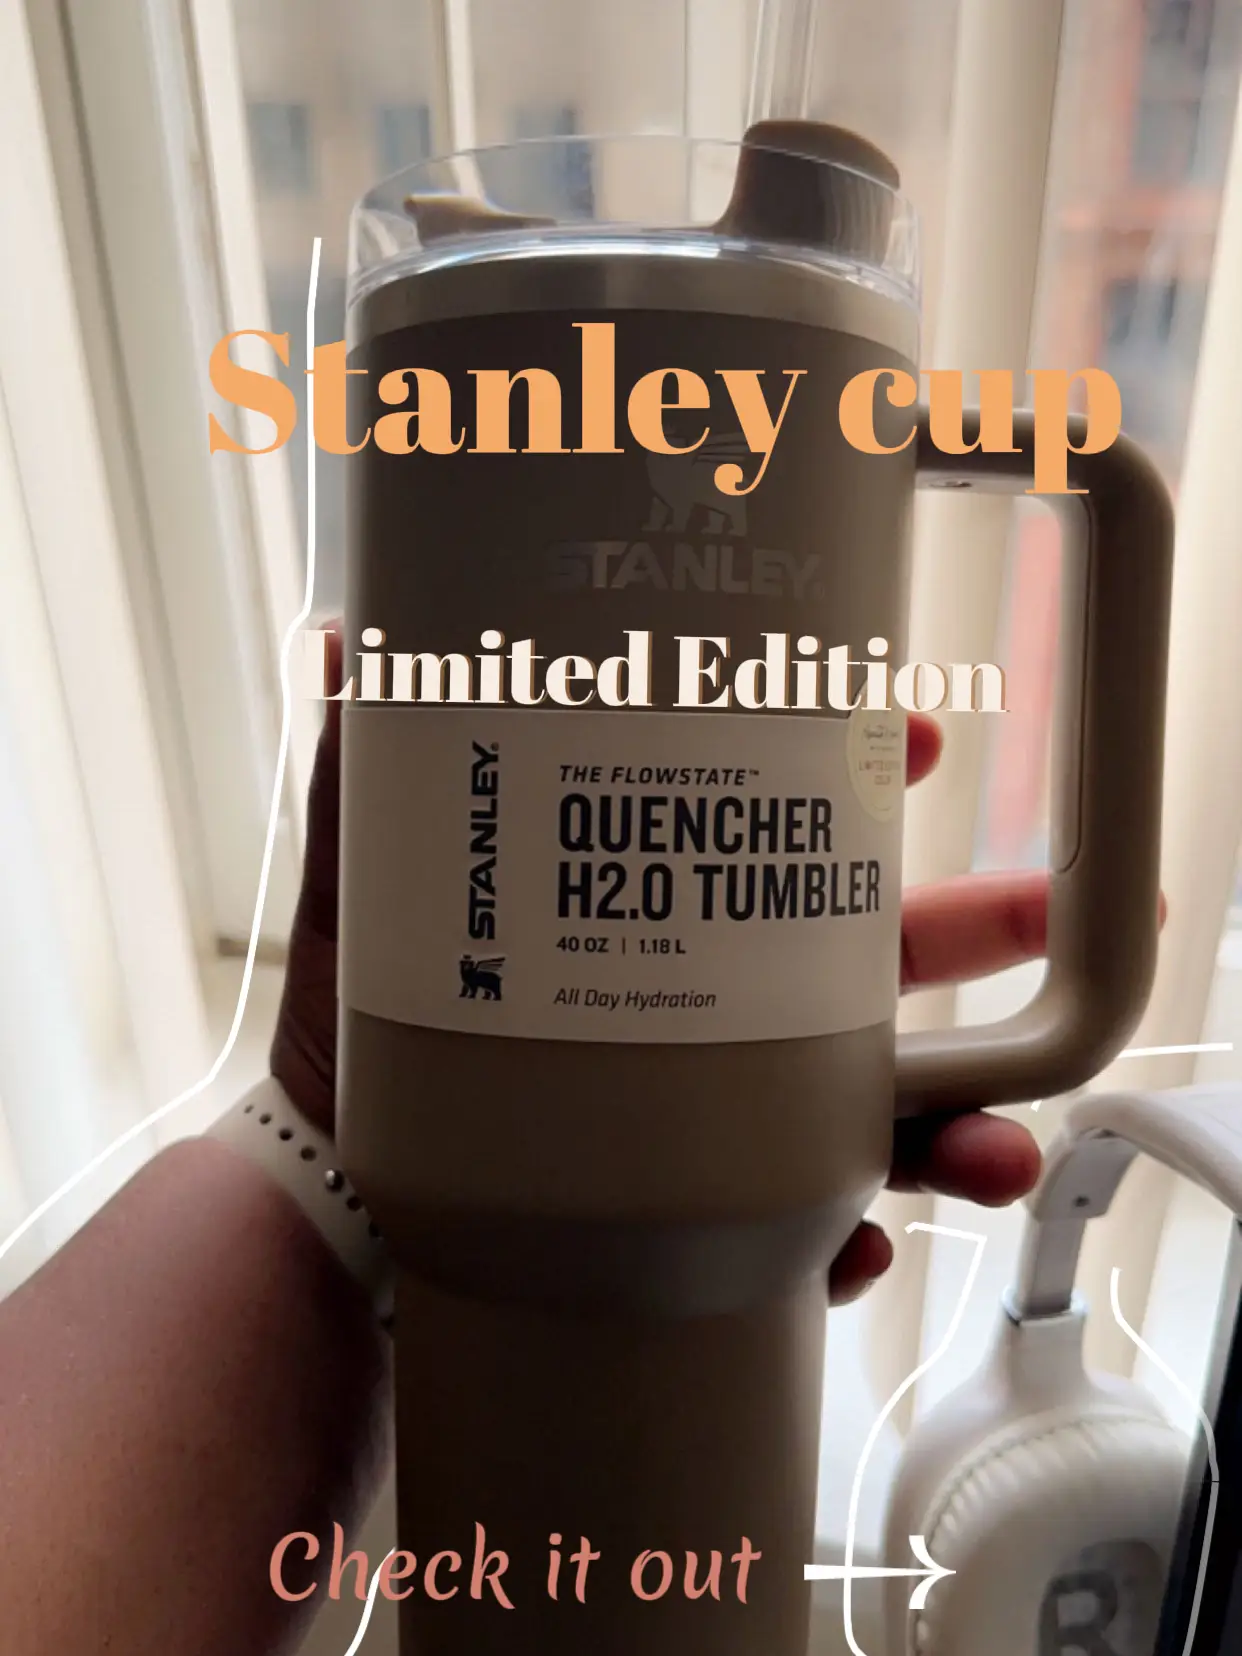 The new Stanley 64oz tumbler is so awesome 👏🏻 #stanleycup